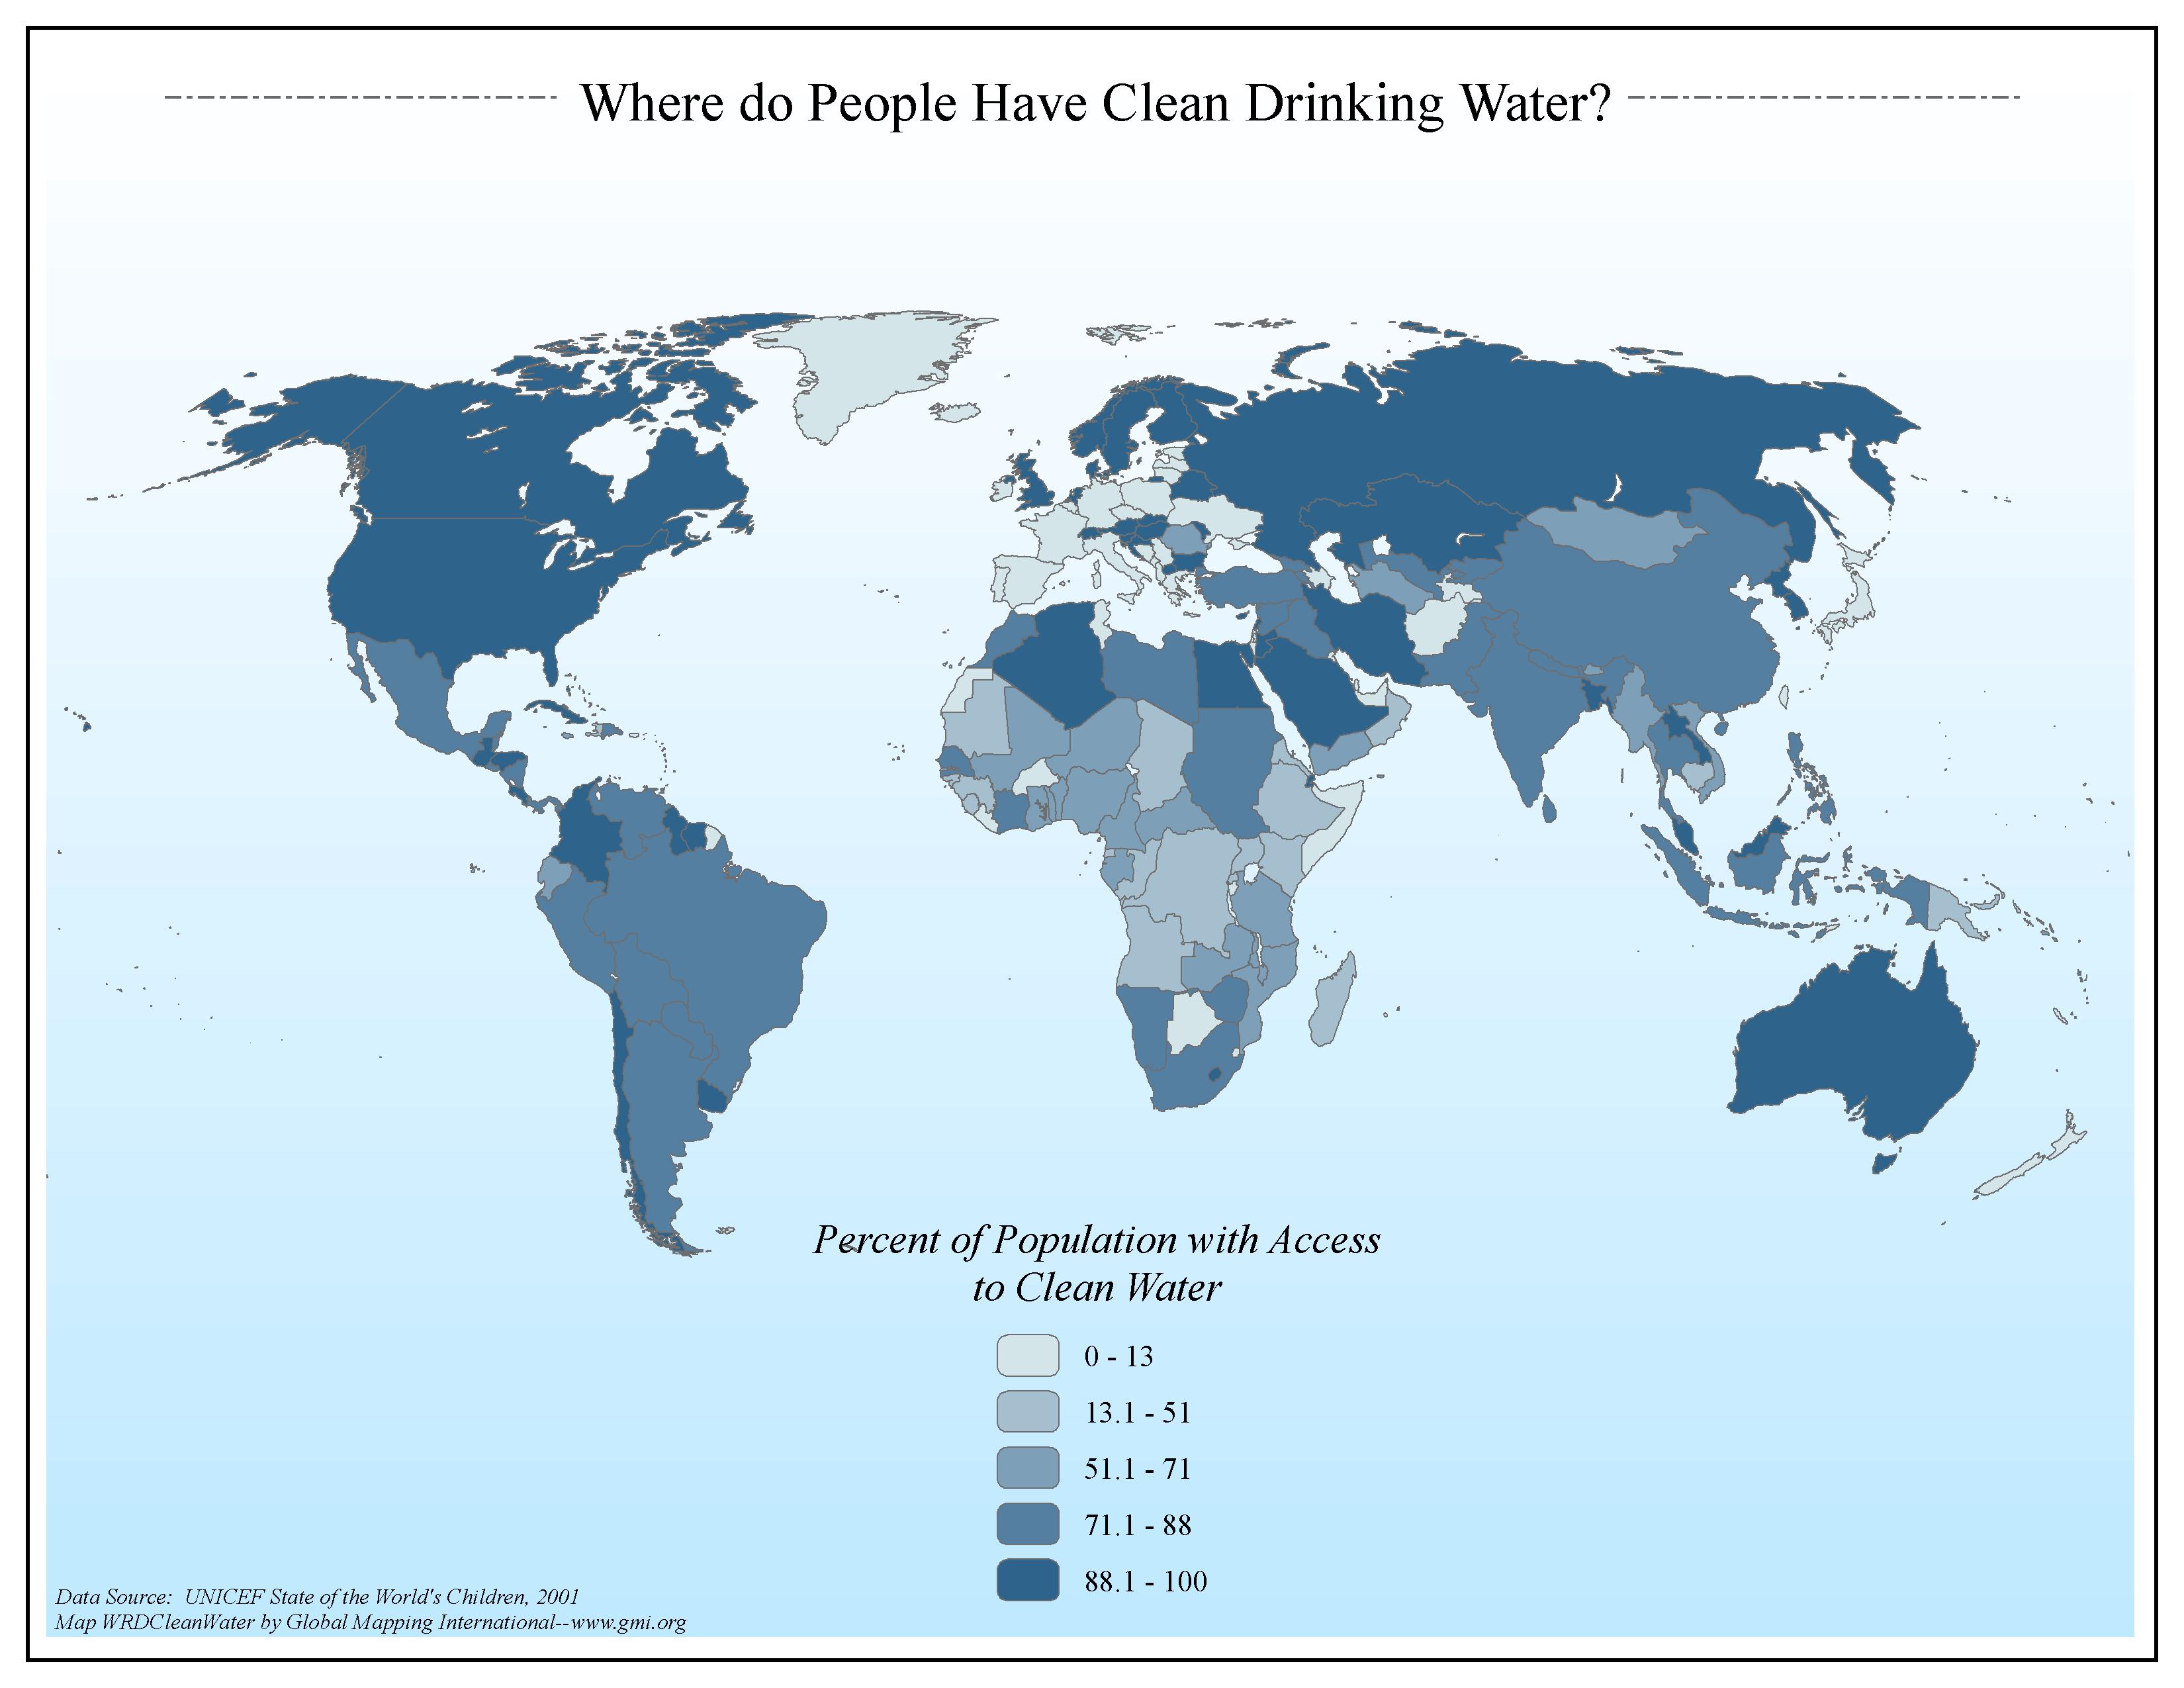 Where do People Have Clean Drinking Water?